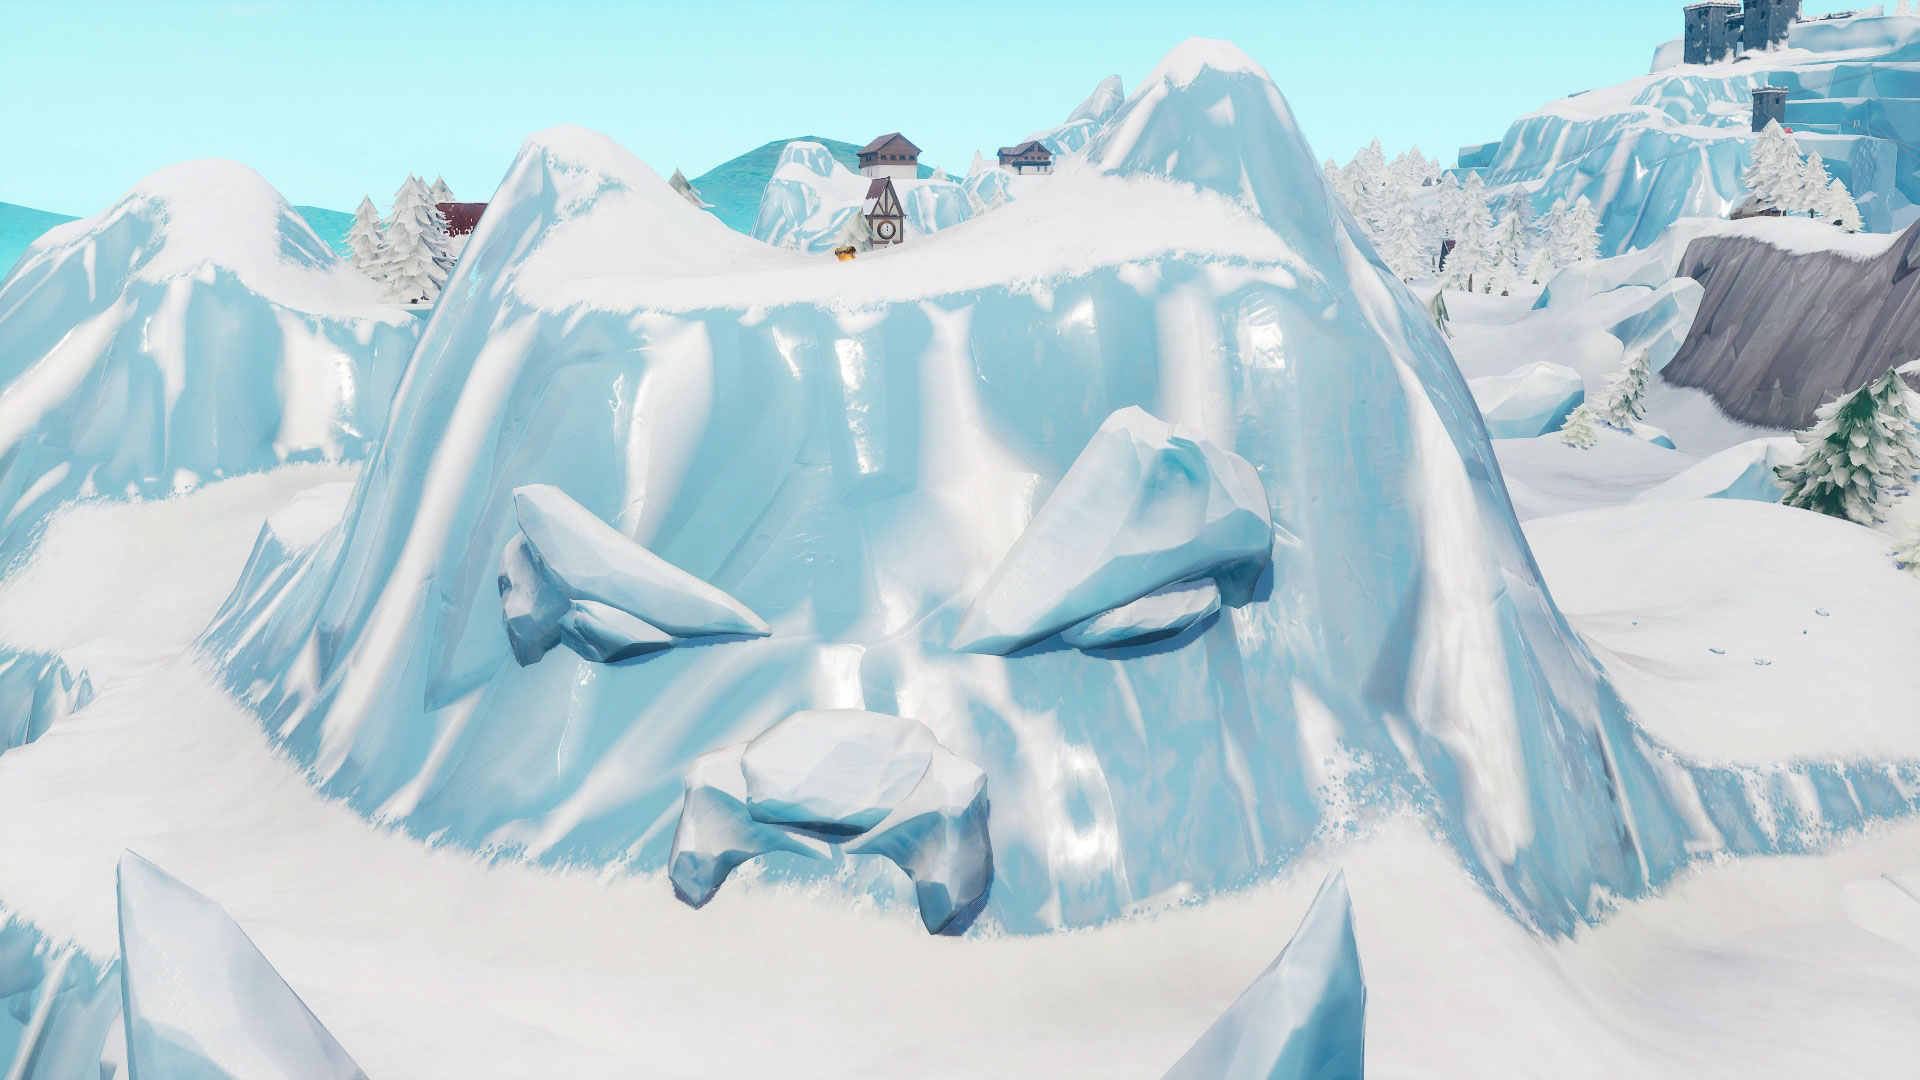 where to visit a giant face in the desert the jungle and the snow in fortnite season 8 week 1 challenge gamesradar - giant stone face locations fortnite